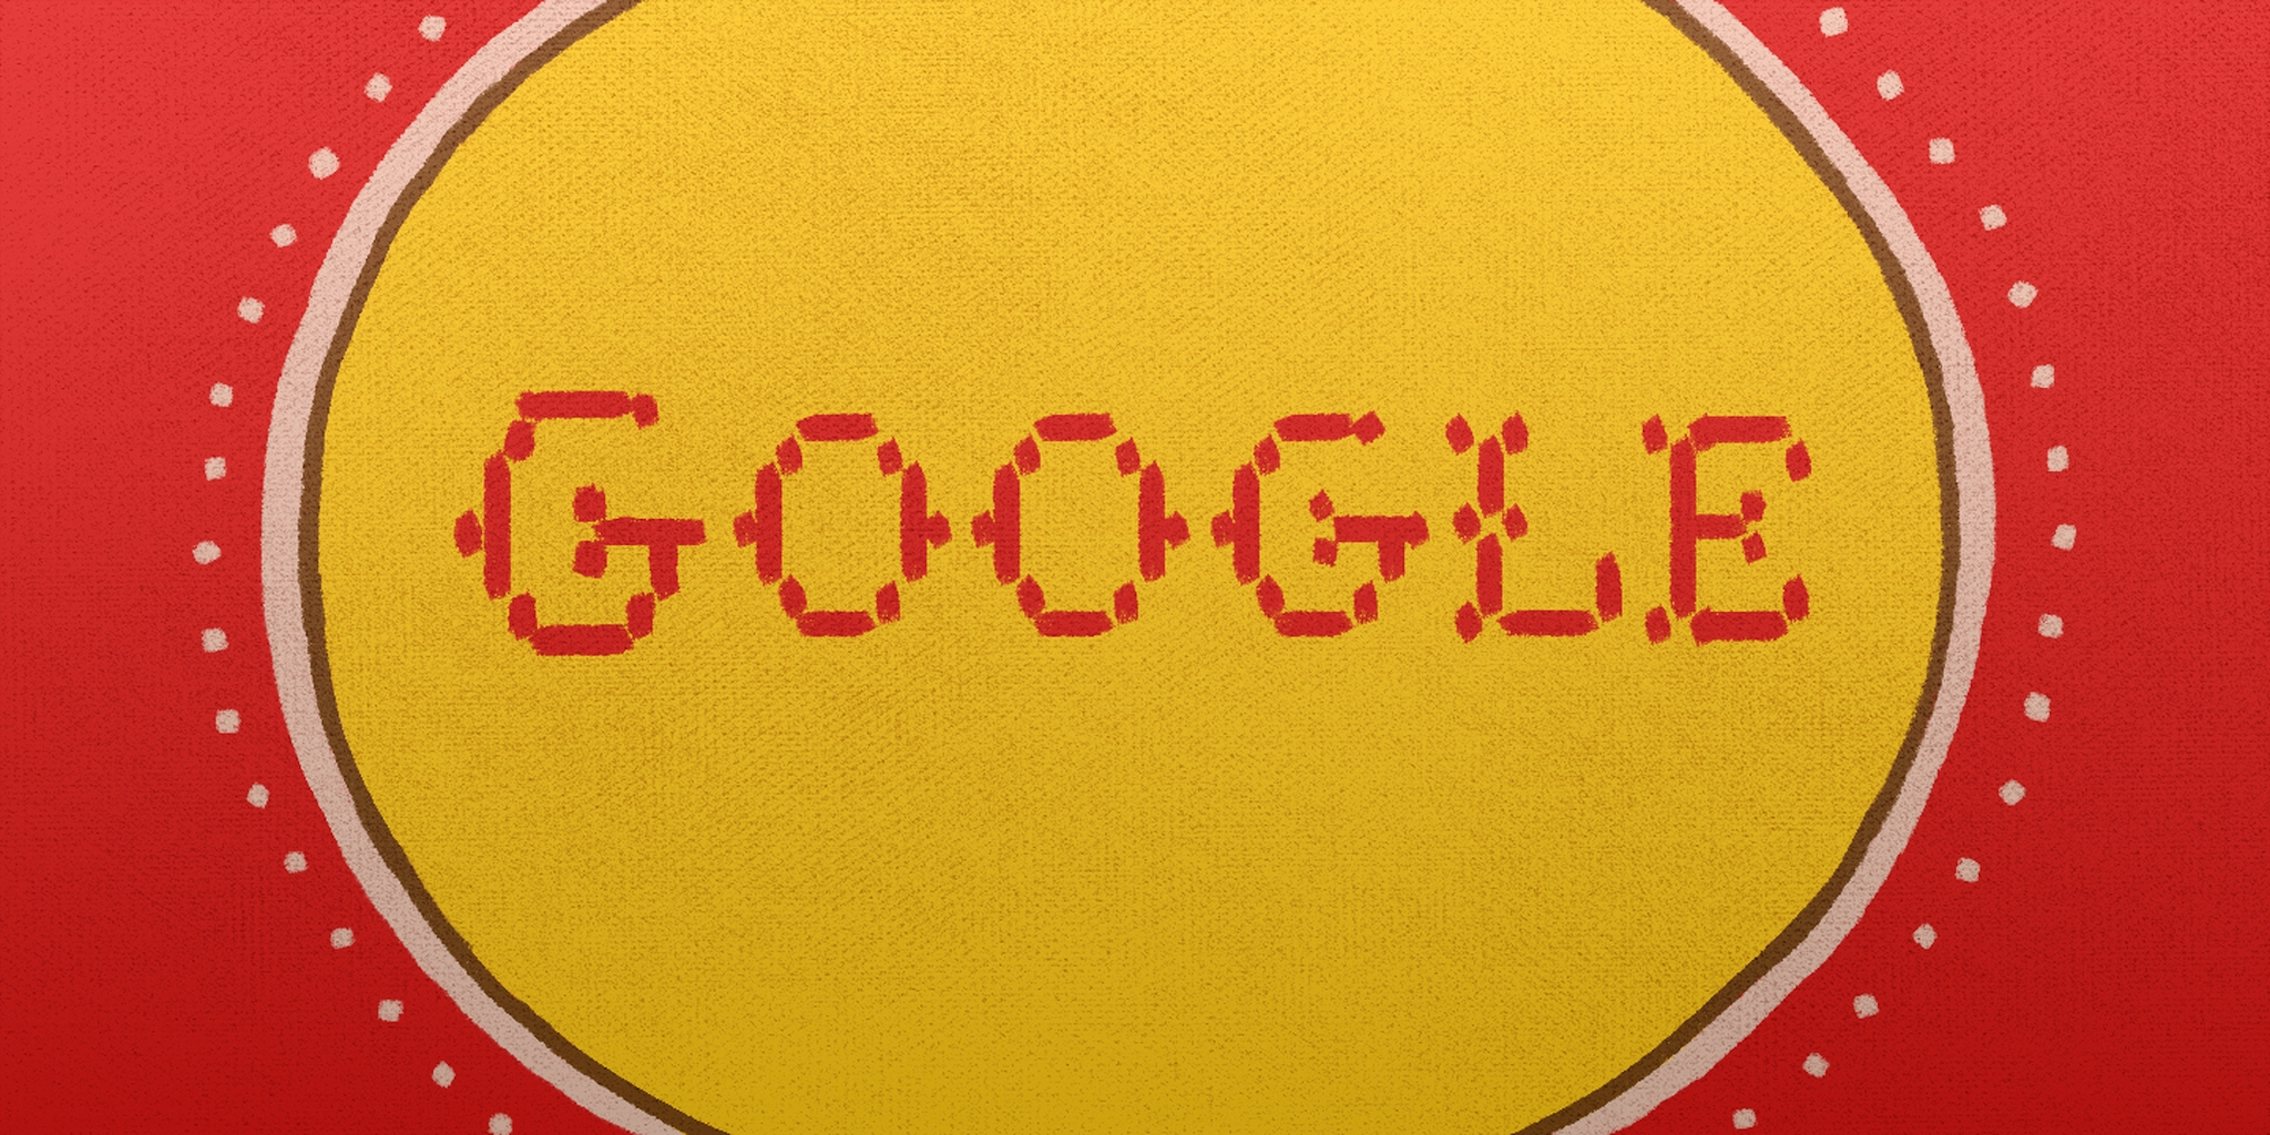 Google Feud' Turns Search Autocompletes Into a Game of Family Feud -  Techlicious